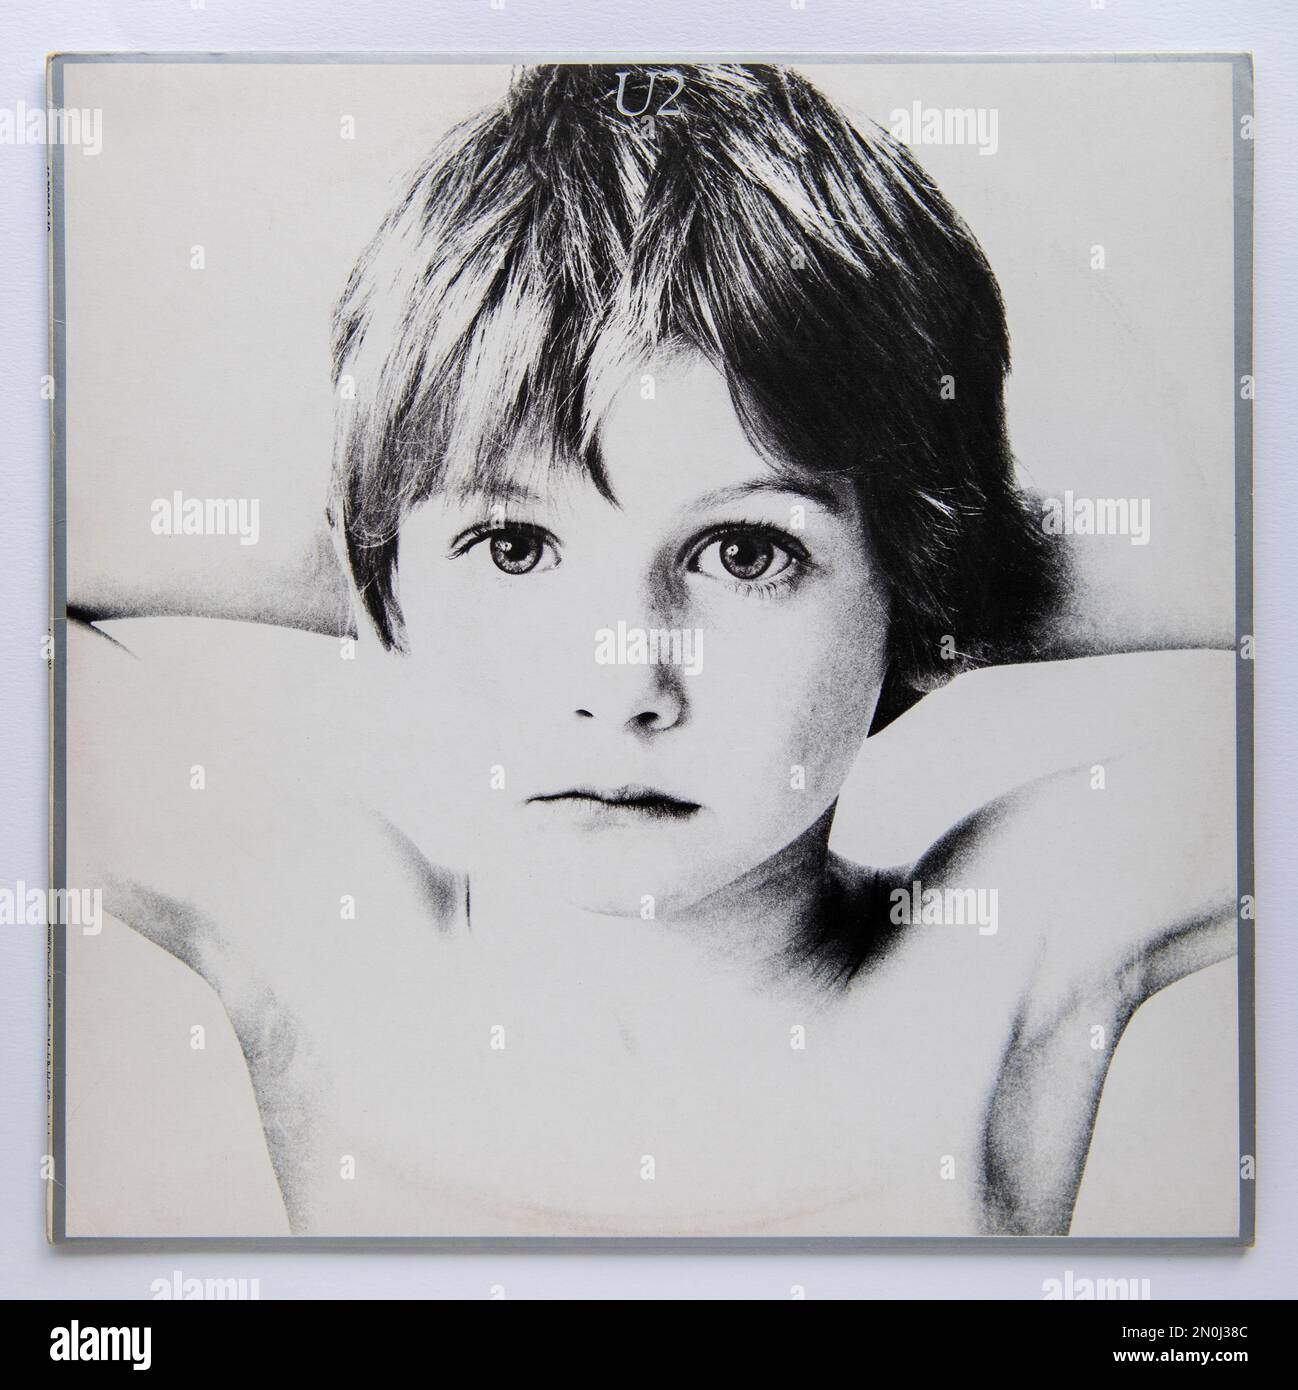 LP cover of Boy, the debut studio album by Irish rock band U2, which was released in 1980 Stock Photo